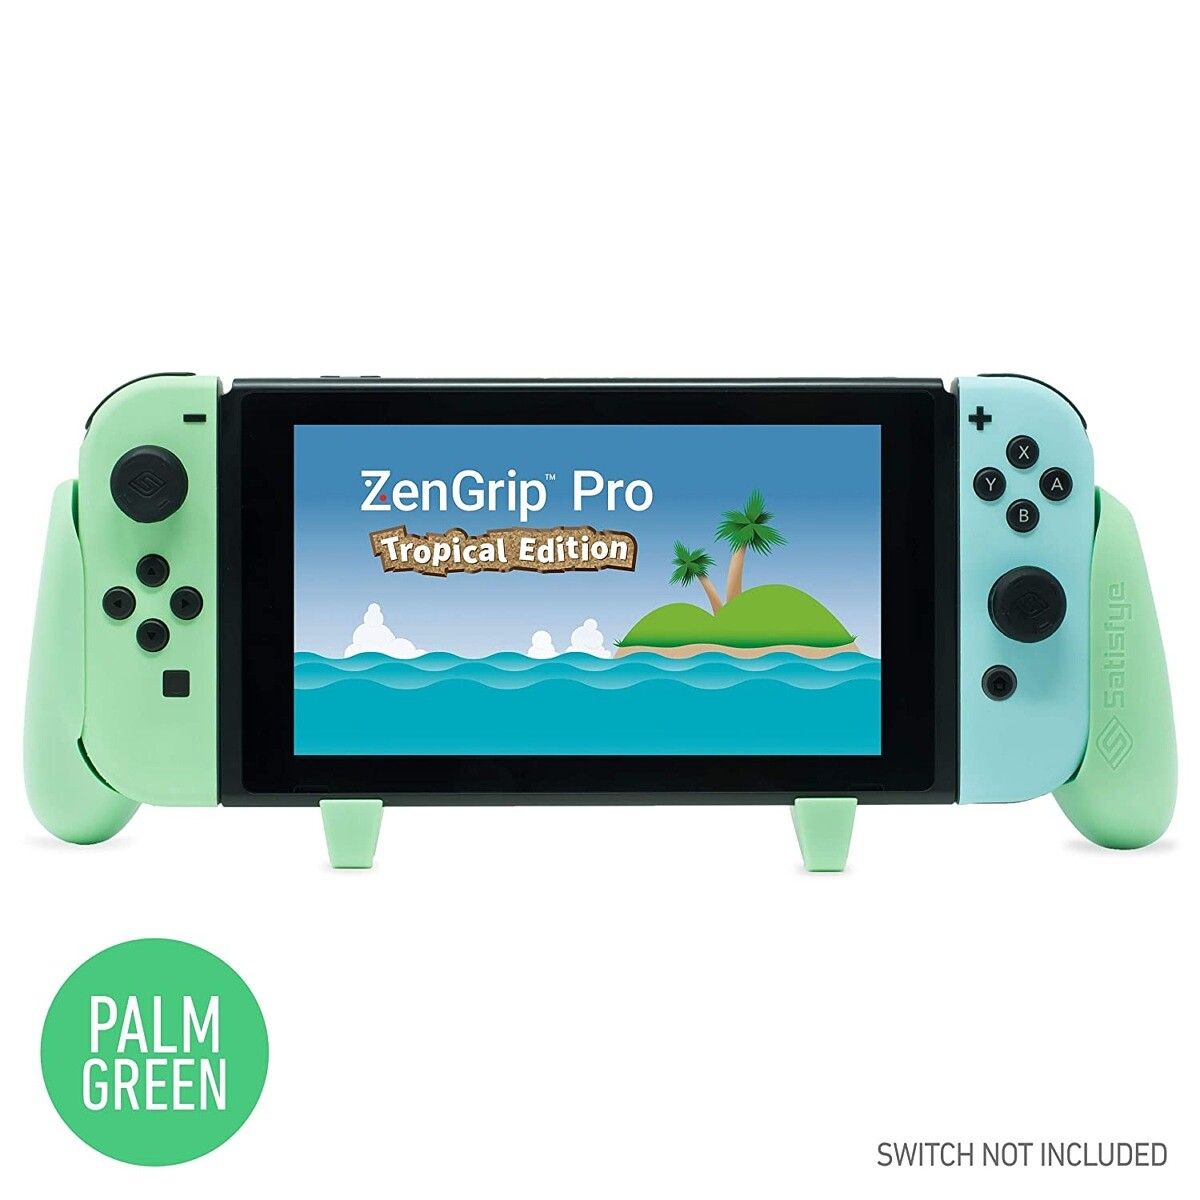 Have a special edition Nintendo Switch? Get a special grip to match! The ZenGrip Pro Tropical Edition has the color palette to match the special edition Switch's pastel blue and green Joy-Cons.